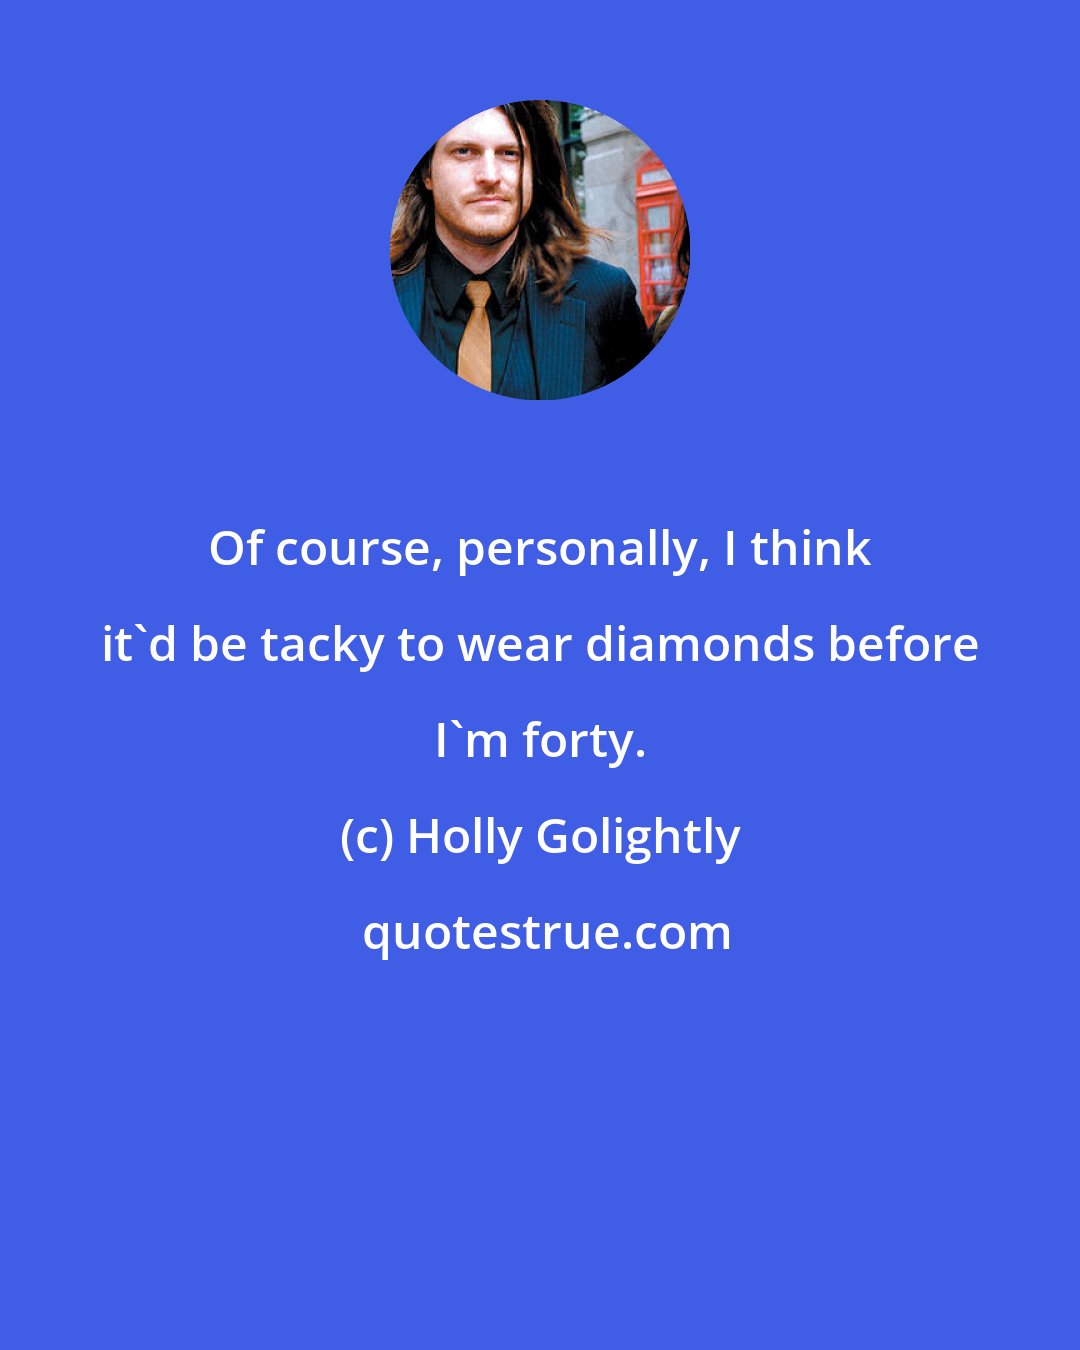 Holly Golightly: Of course, personally, I think it'd be tacky to wear diamonds before I'm forty.